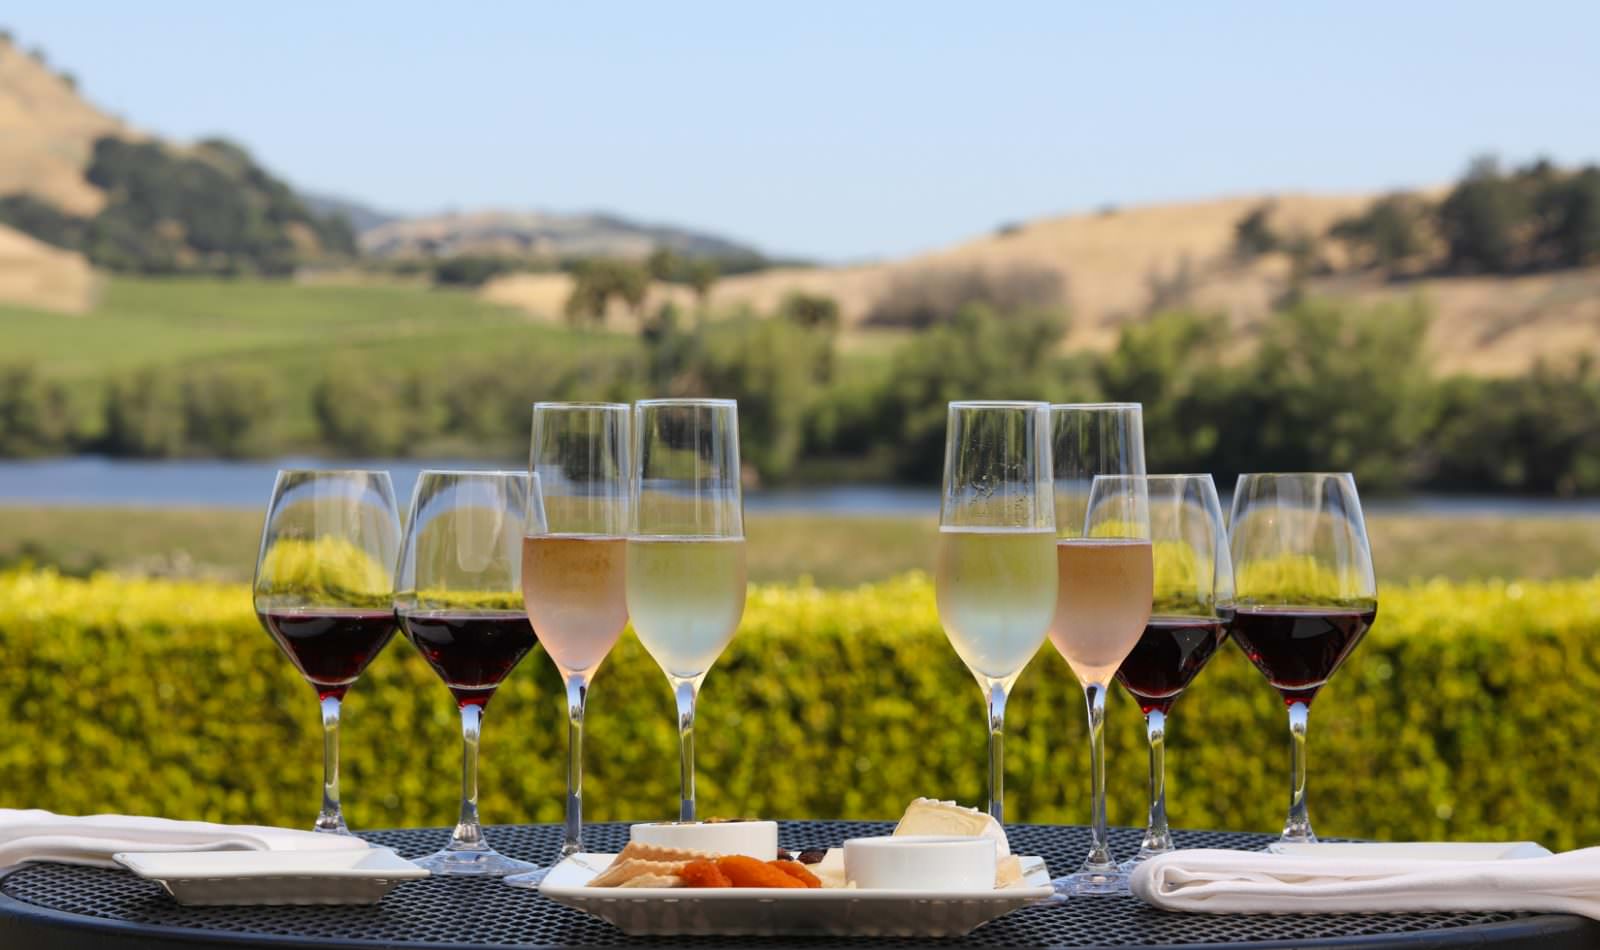 Food And Wine Tours In Napa Valley - Exploring Gastronomic Pleasures